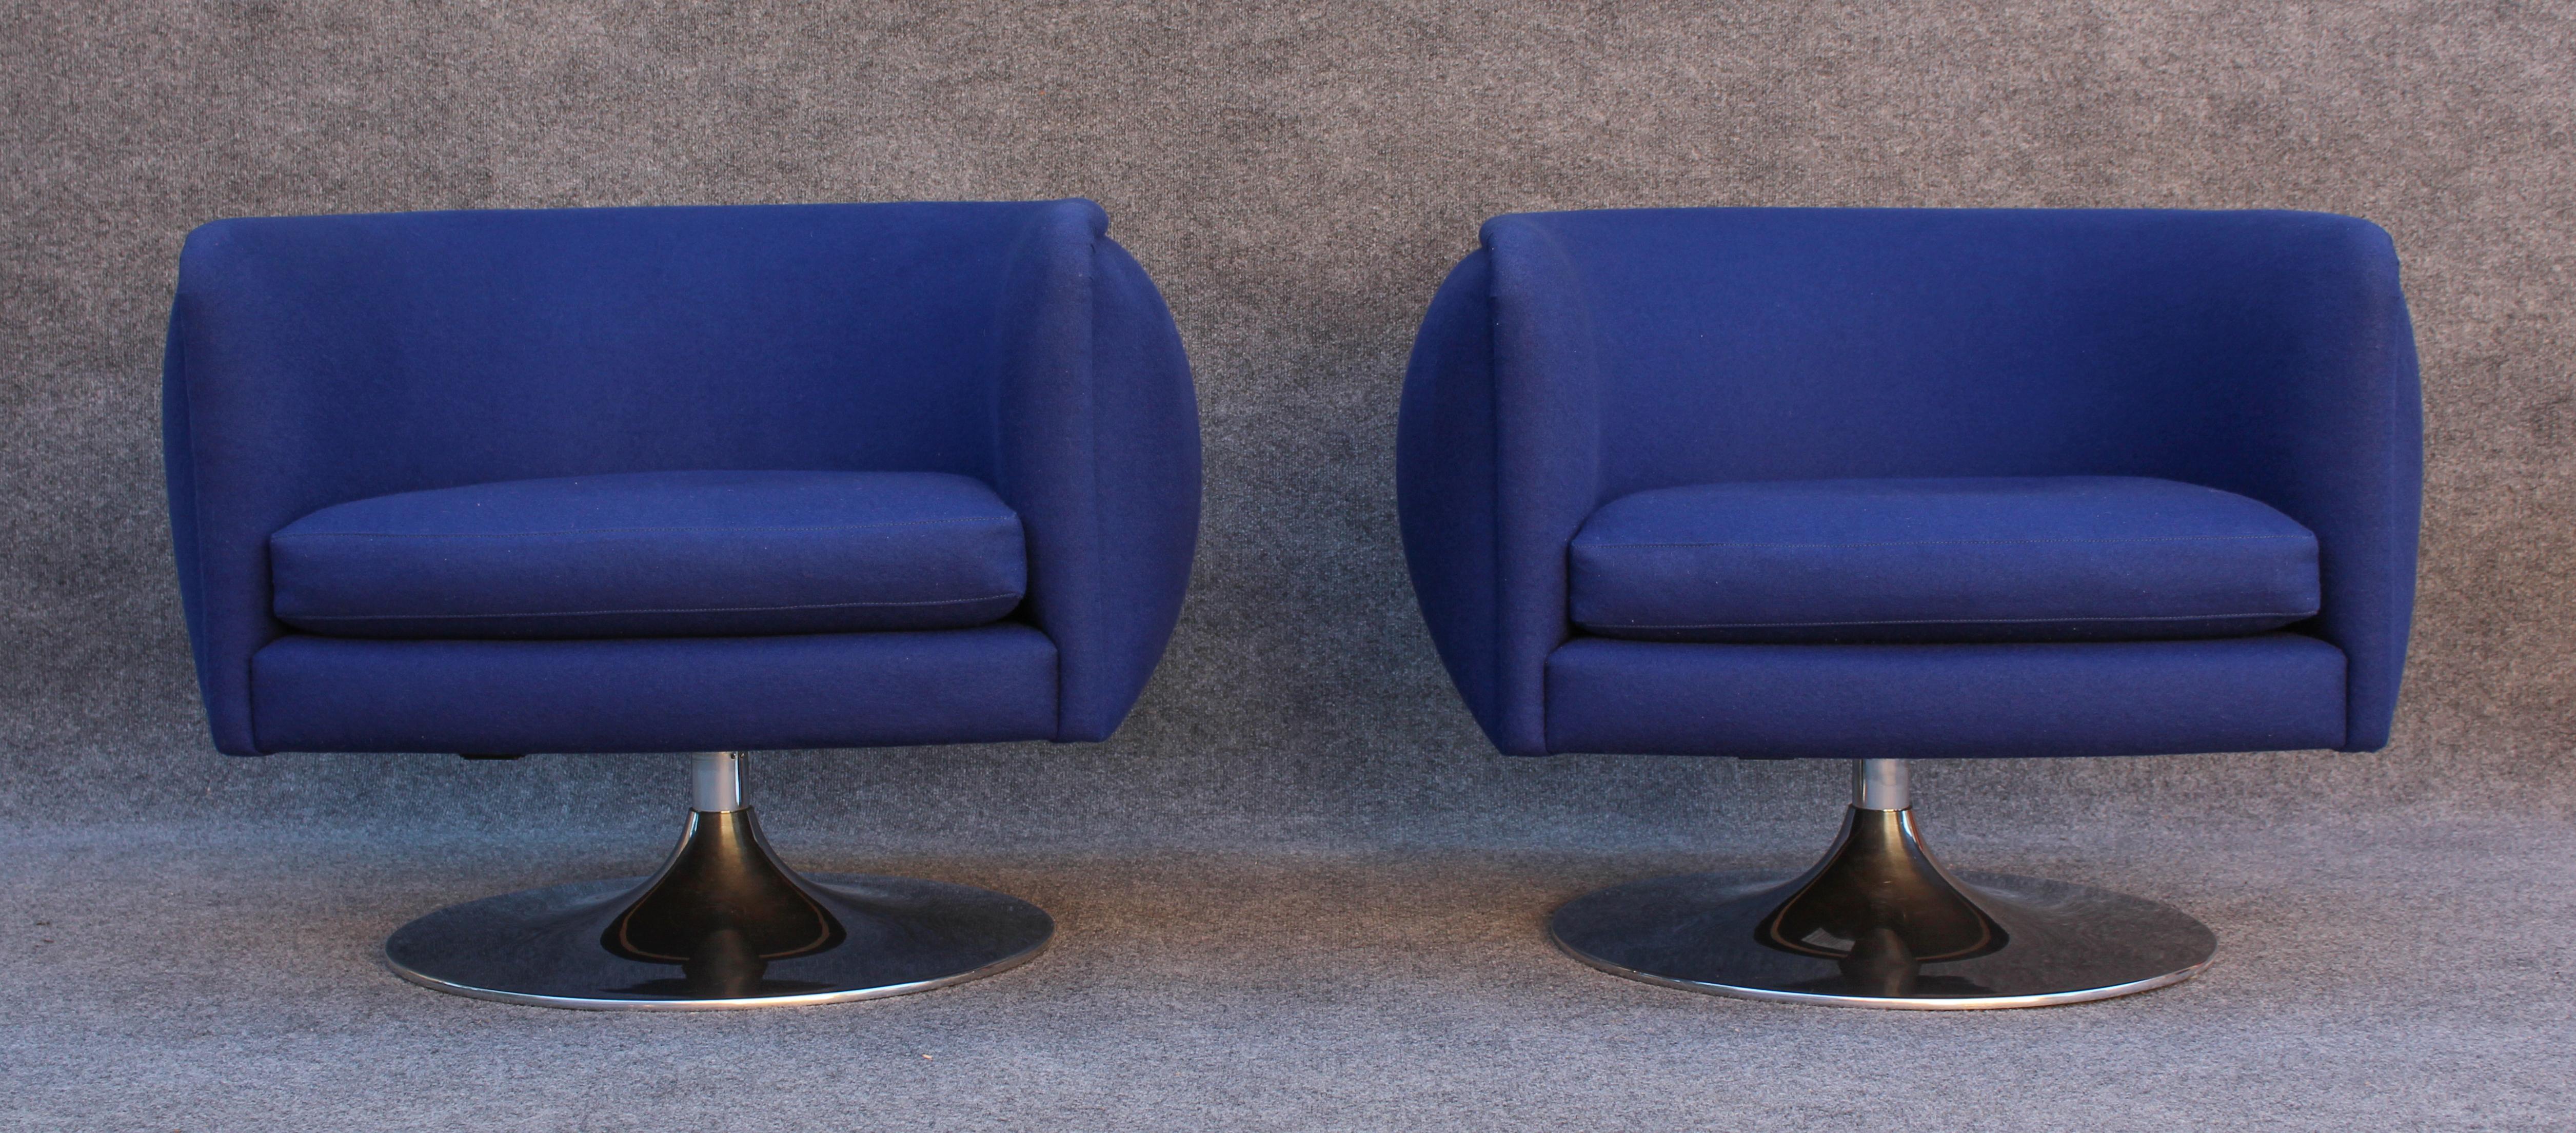 Mid-Century Modern Joe D'Urso for Knoll Pair of Swivel Club Lounge Chairs in Deep Blue Wool Blend For Sale